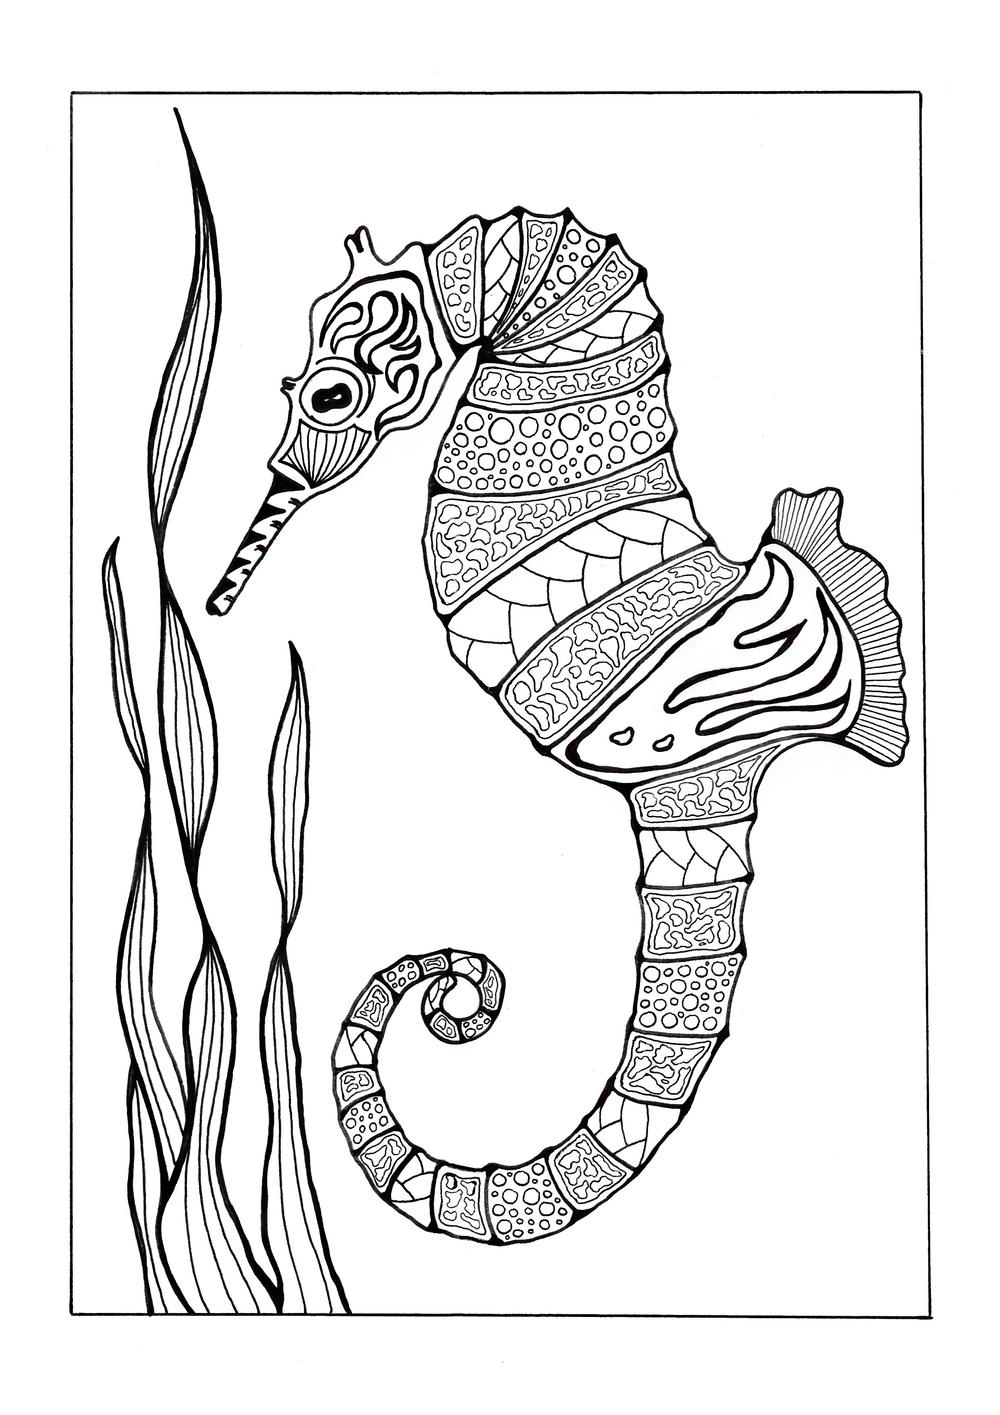 13+ bendon coloring books for adults Colorful seahorse adult coloring page